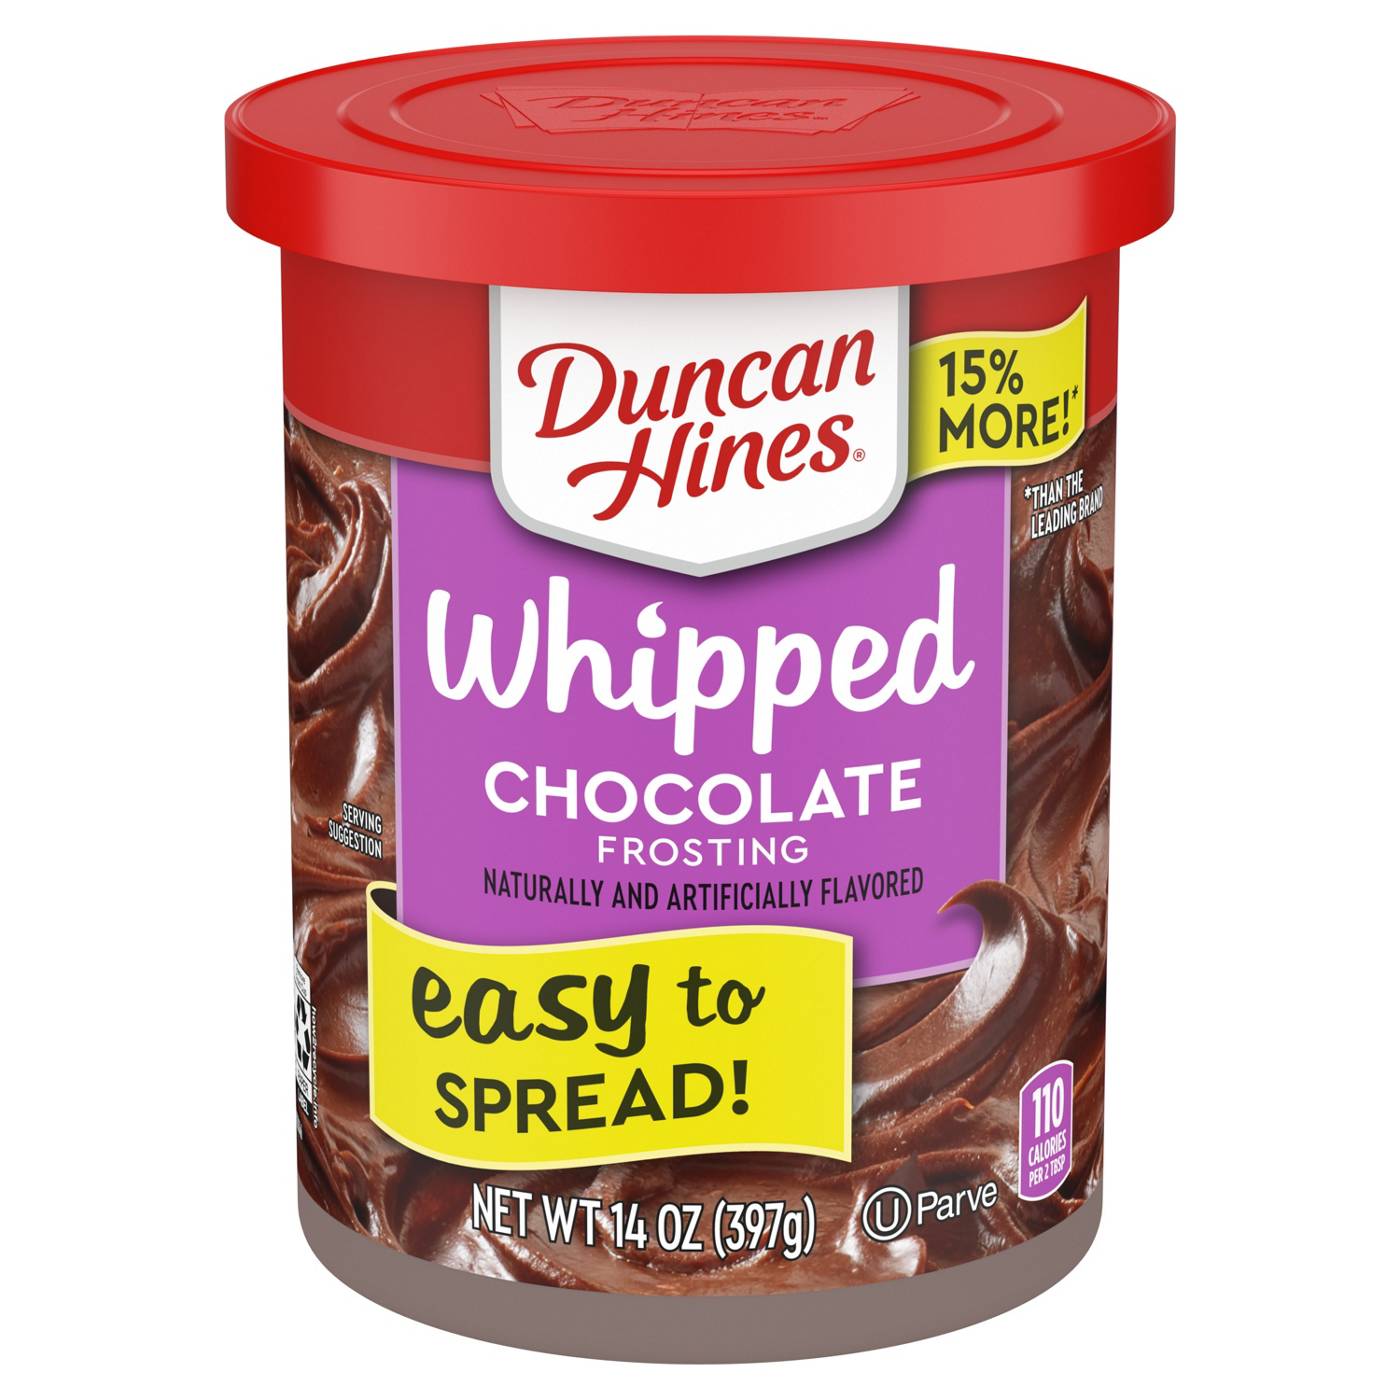 Duncan Hines Whipped Chocolate Frosting; image 1 of 7